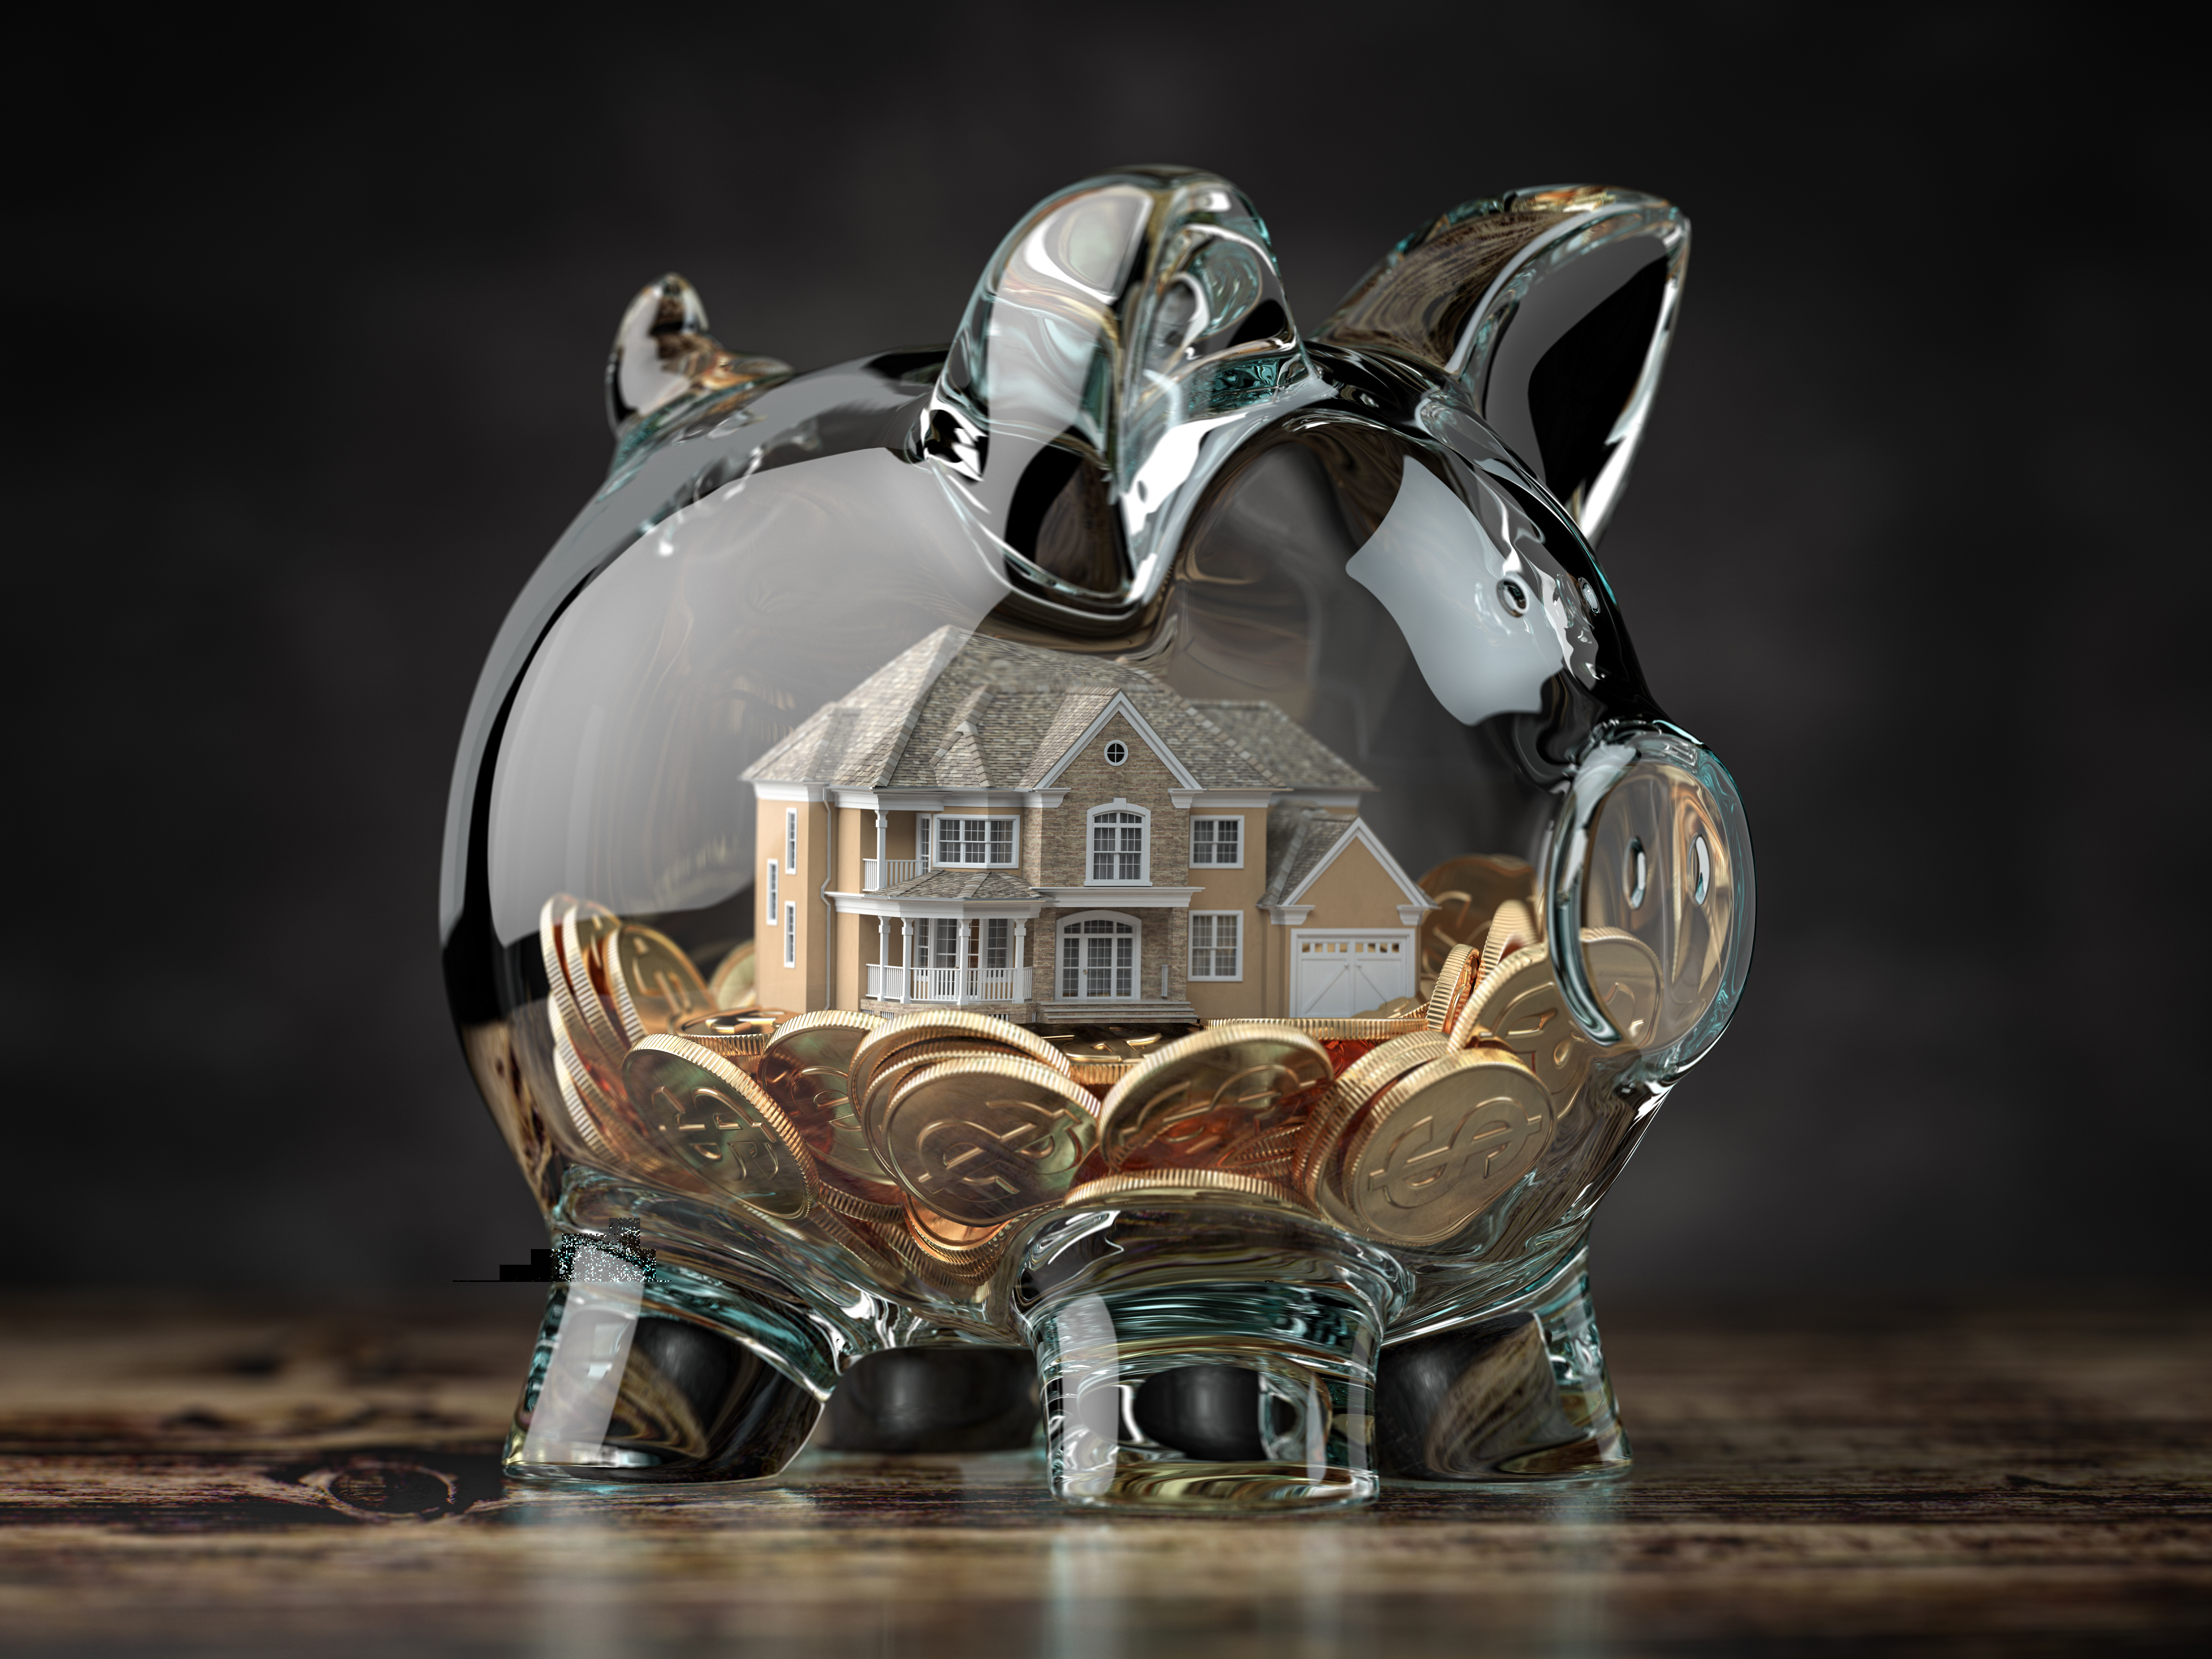 glass-piggy-bank-with-coins-and-house-mortgage-s-2021-08-28-00-33-48-utc.jpg